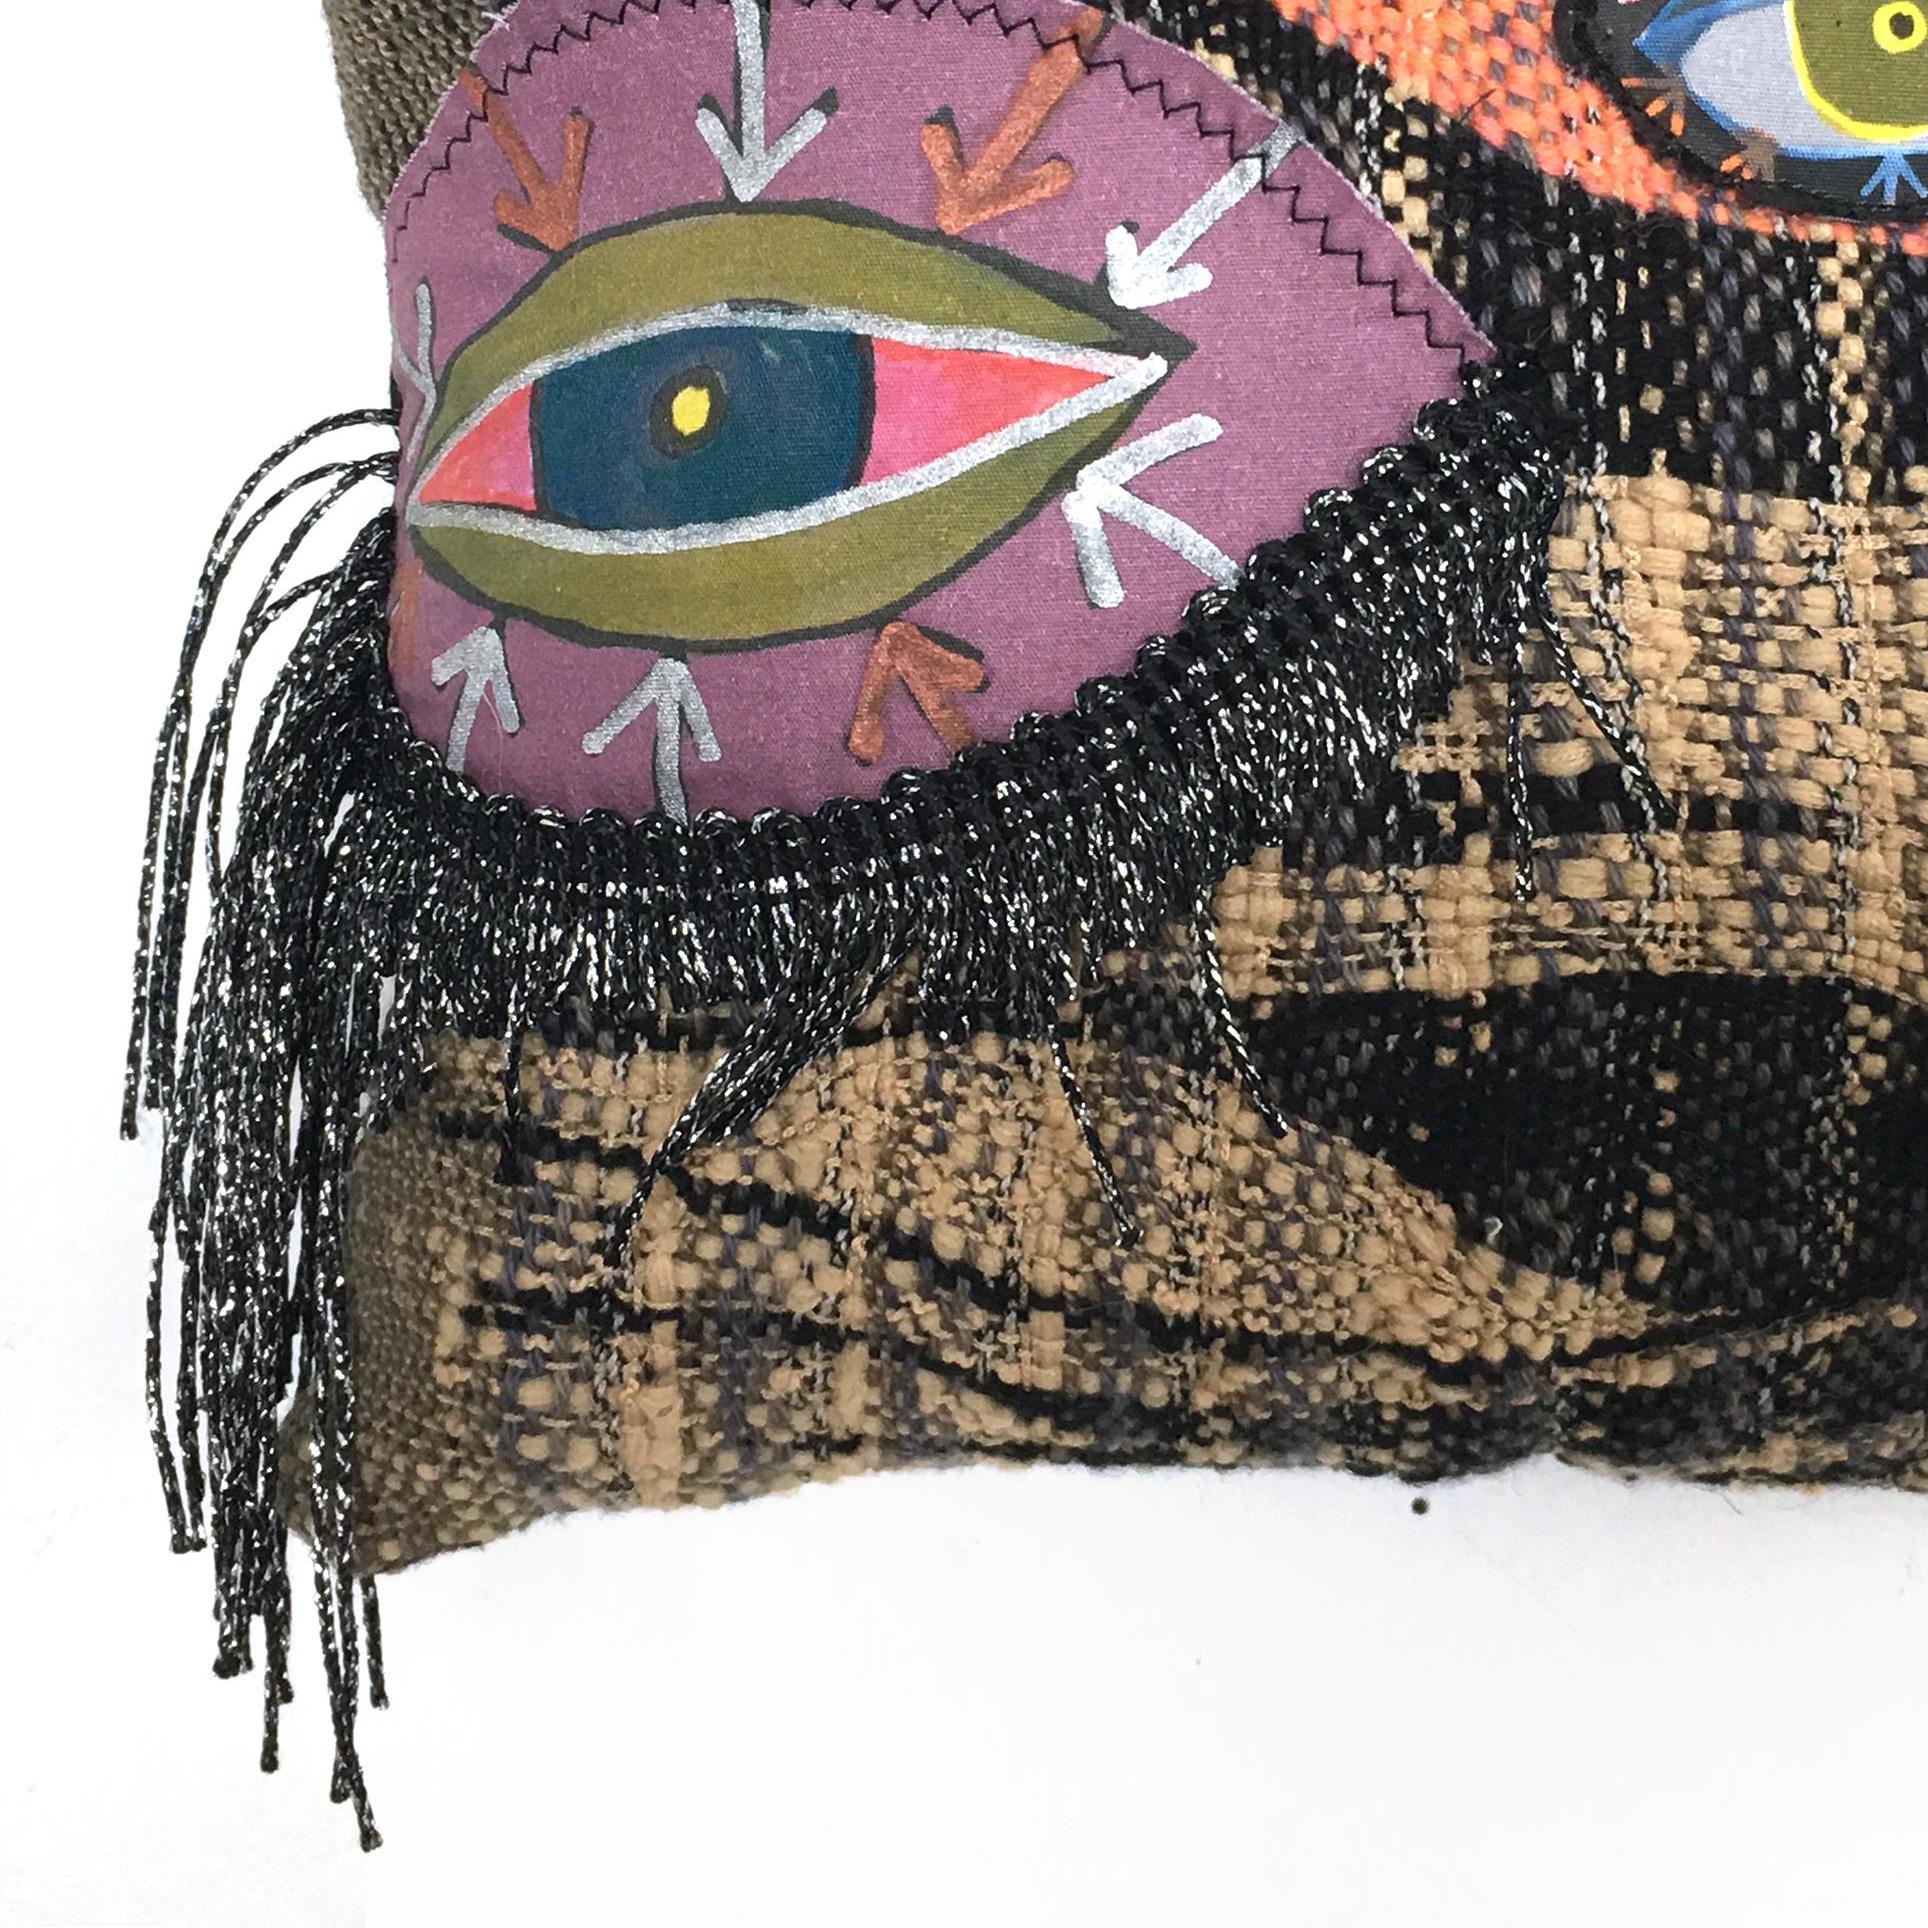 Juliet Martin makes her viewers see the message beyond the joke. Her satiric memoirs illustrate personal stories with playful forms, painful punchlines, and caustic visual one-liners.
Why fiber? Weaving fabric physically and mentally attaches her to